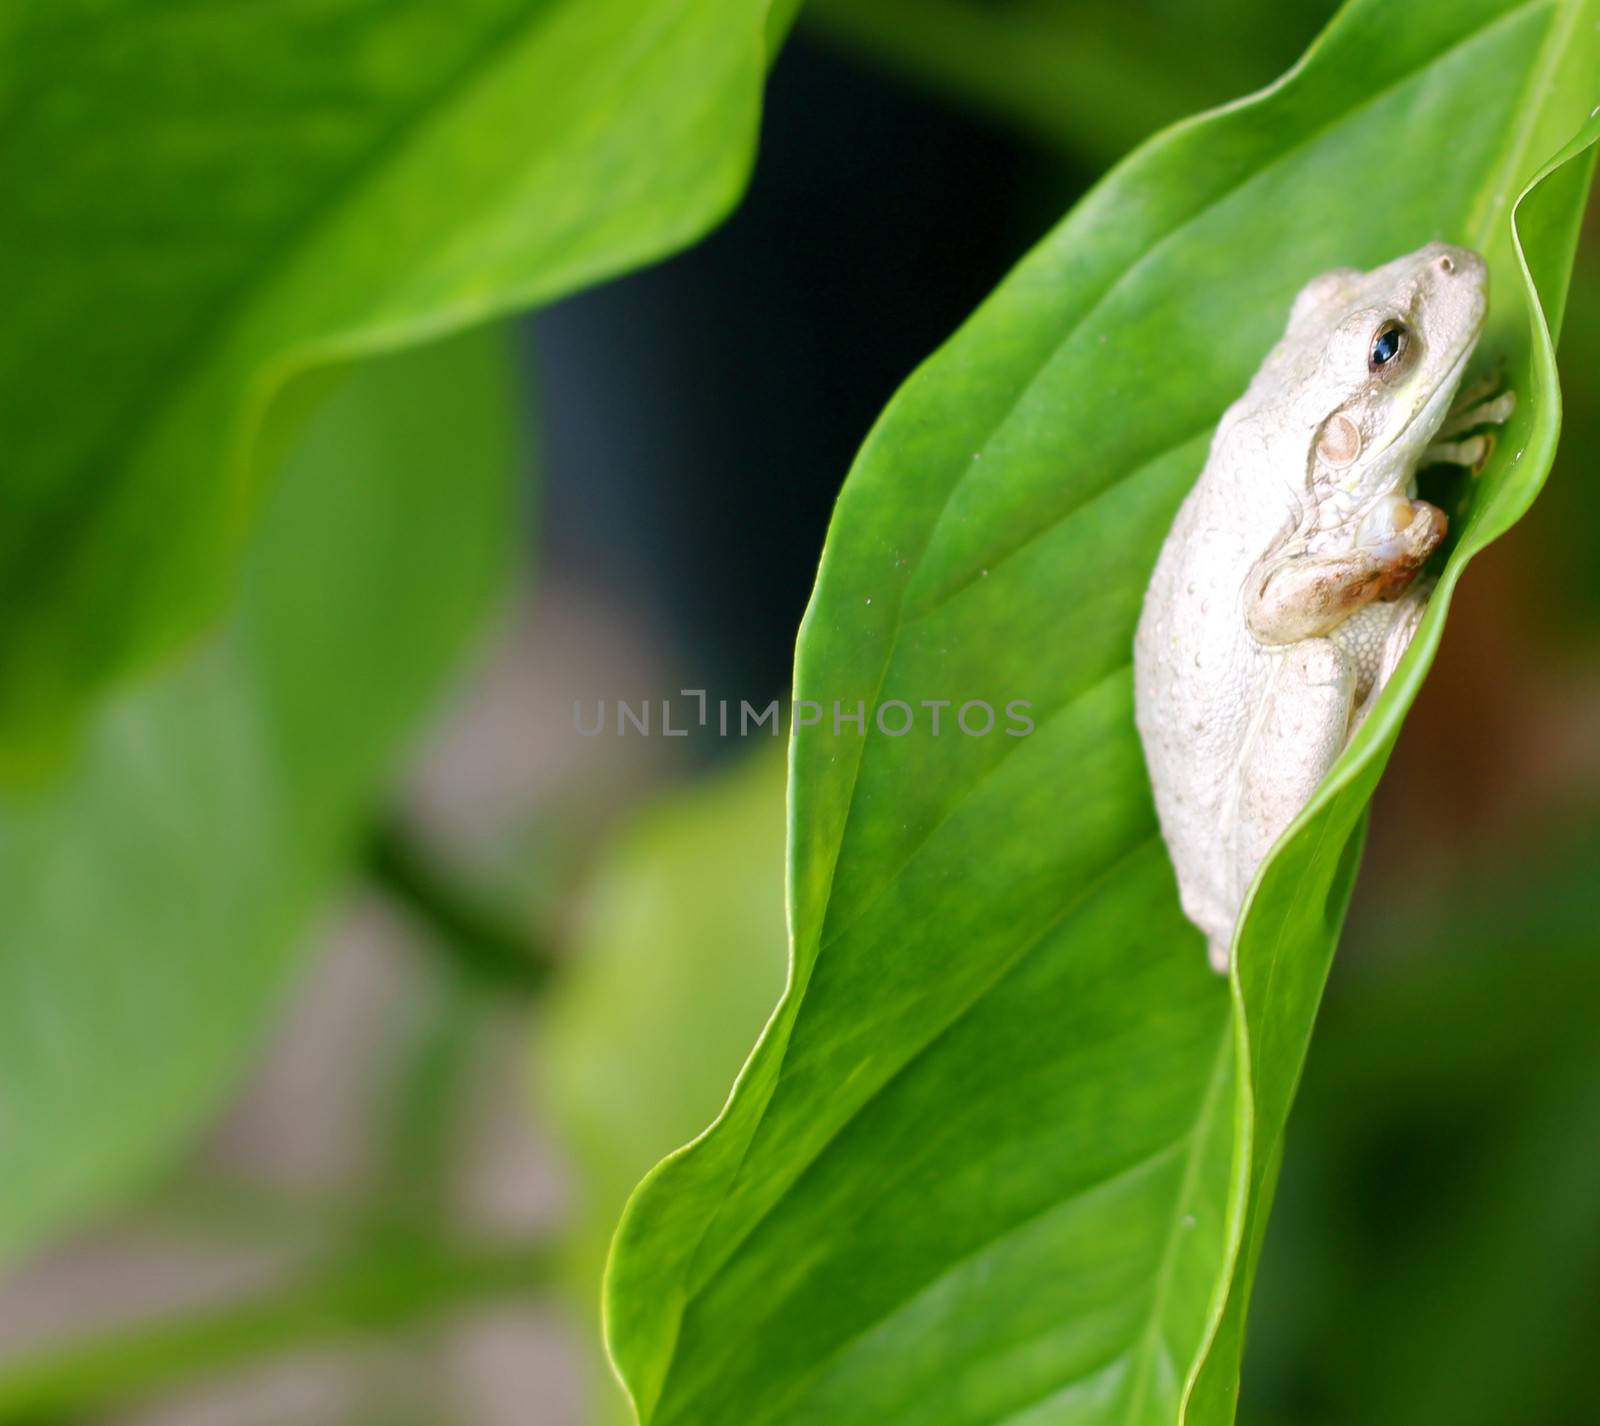 A Cuban Tree Frog (Osteopilus Septentrionalis) on a large leaf in a tree.